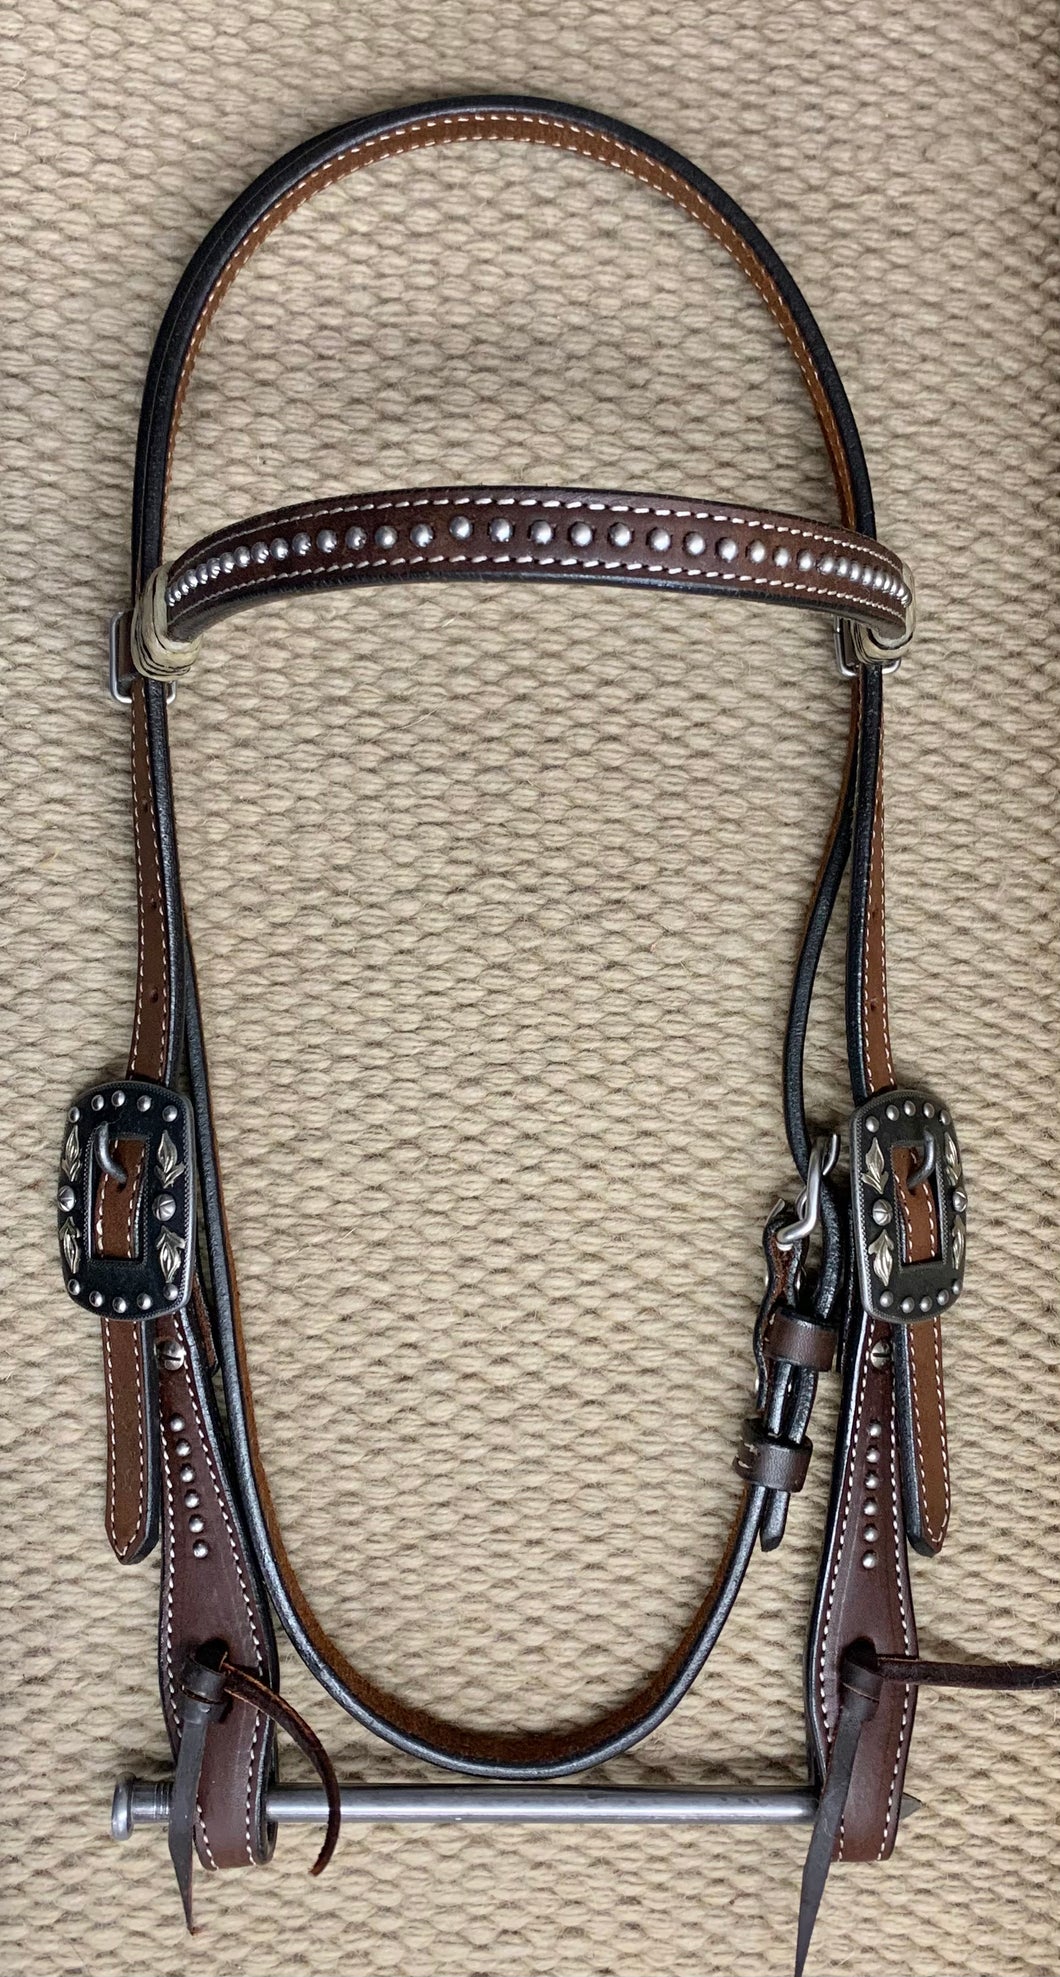 Headstall - HS12 - PC Dark w/ Dots and Rawhide